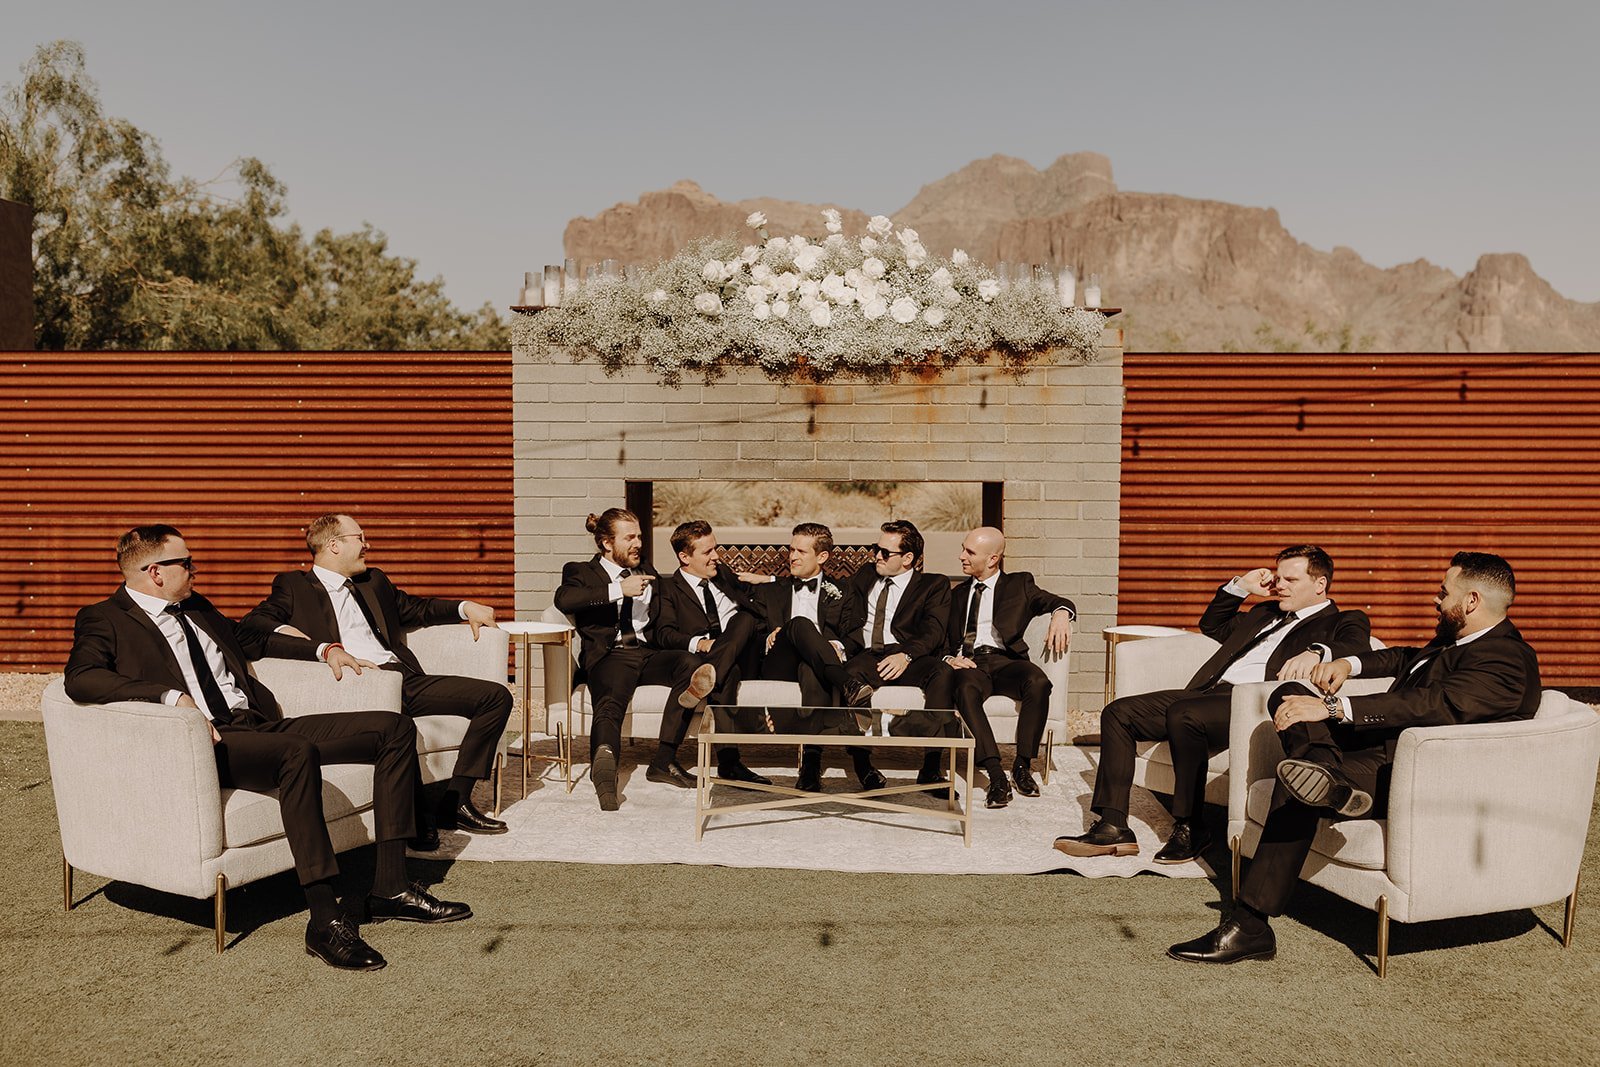 Groom and groomsmen in black suits sitting on outdoor furniture at a desert wedding venue in Arizona